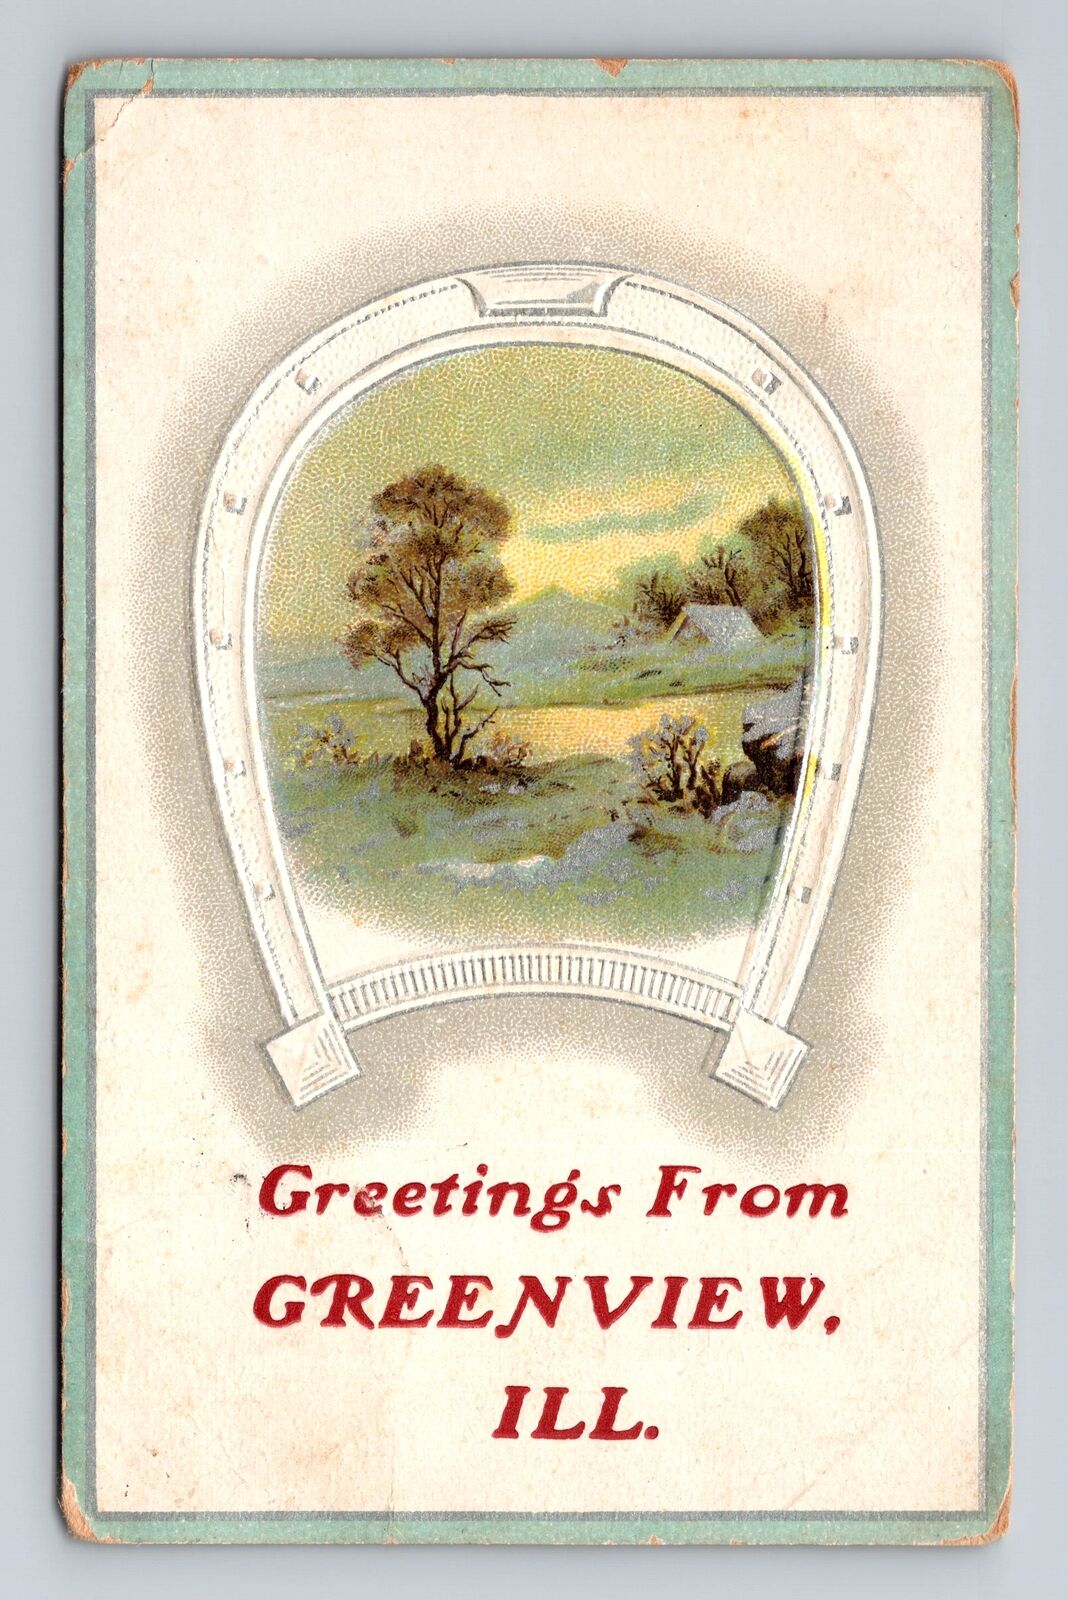 Greenview IL-Illinois, Scenic Country Greetings, Antique Vintage Postcard